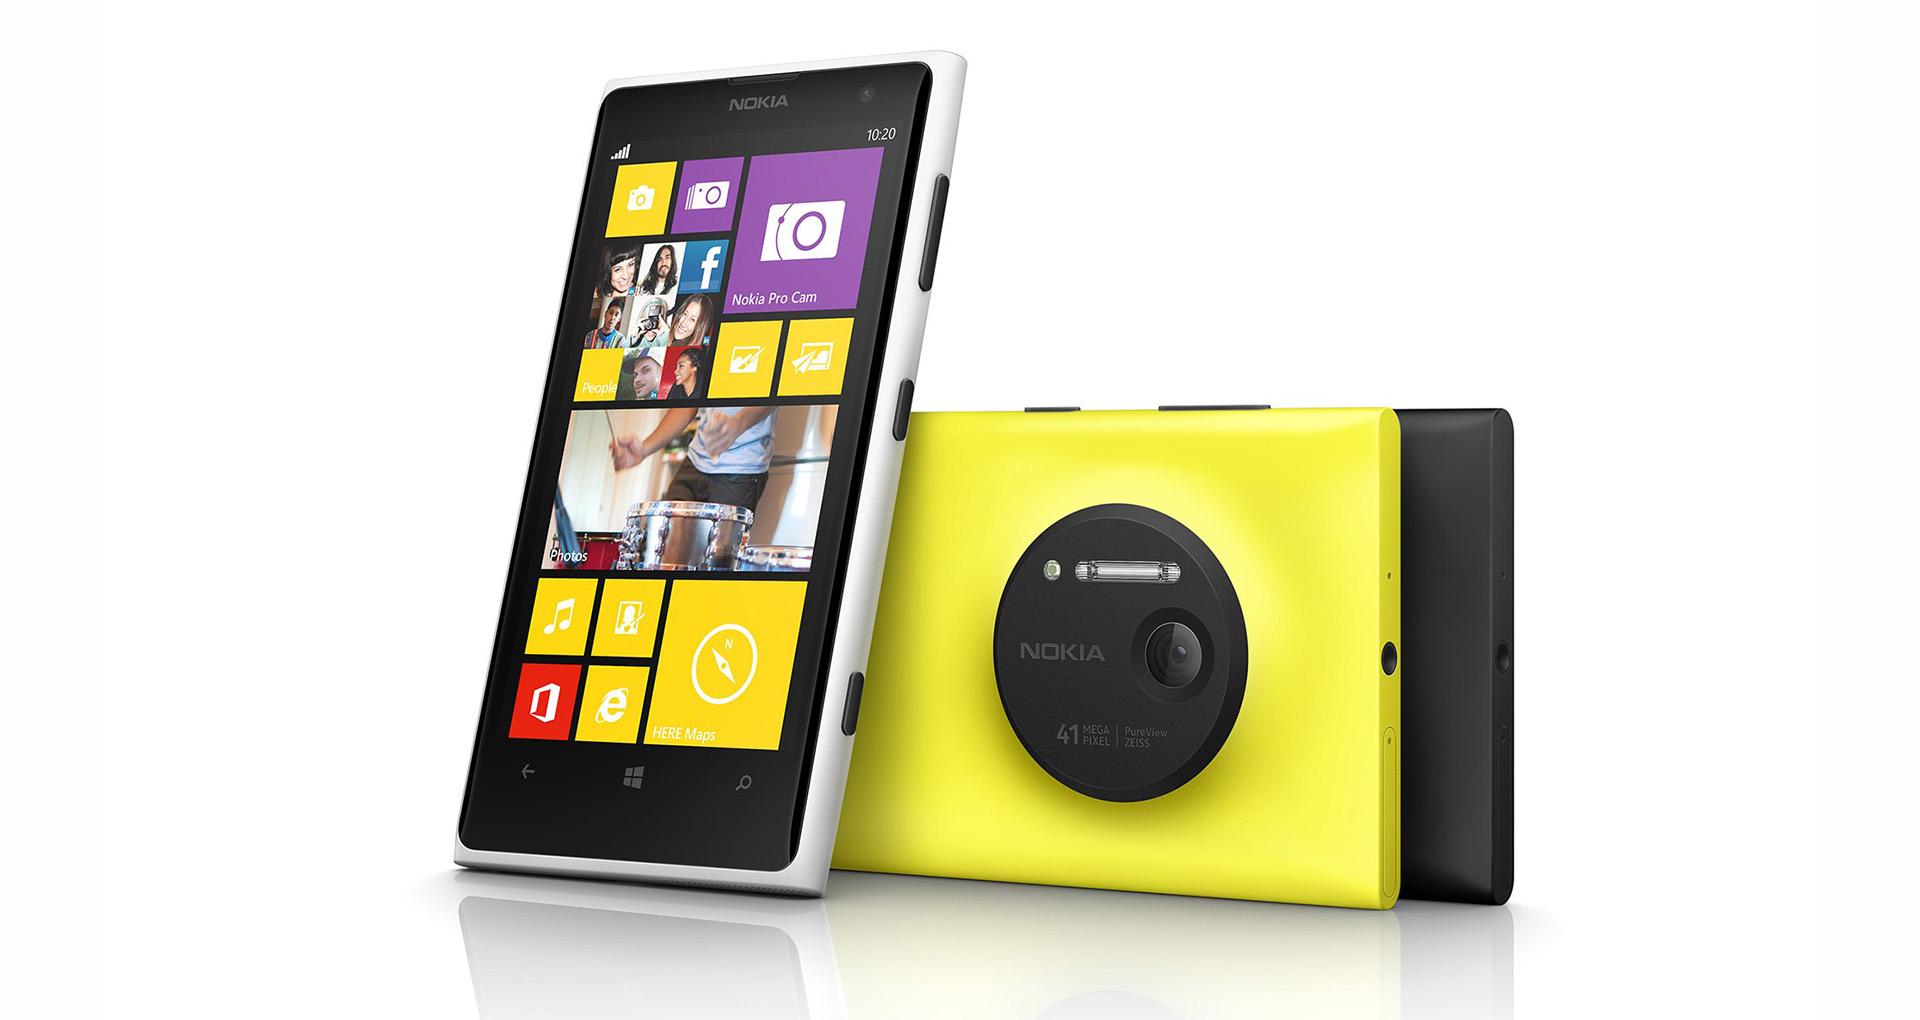 Lumia 1020 was one of the latest flagships launched by Nokia.  (Source: Nokia / Playback)